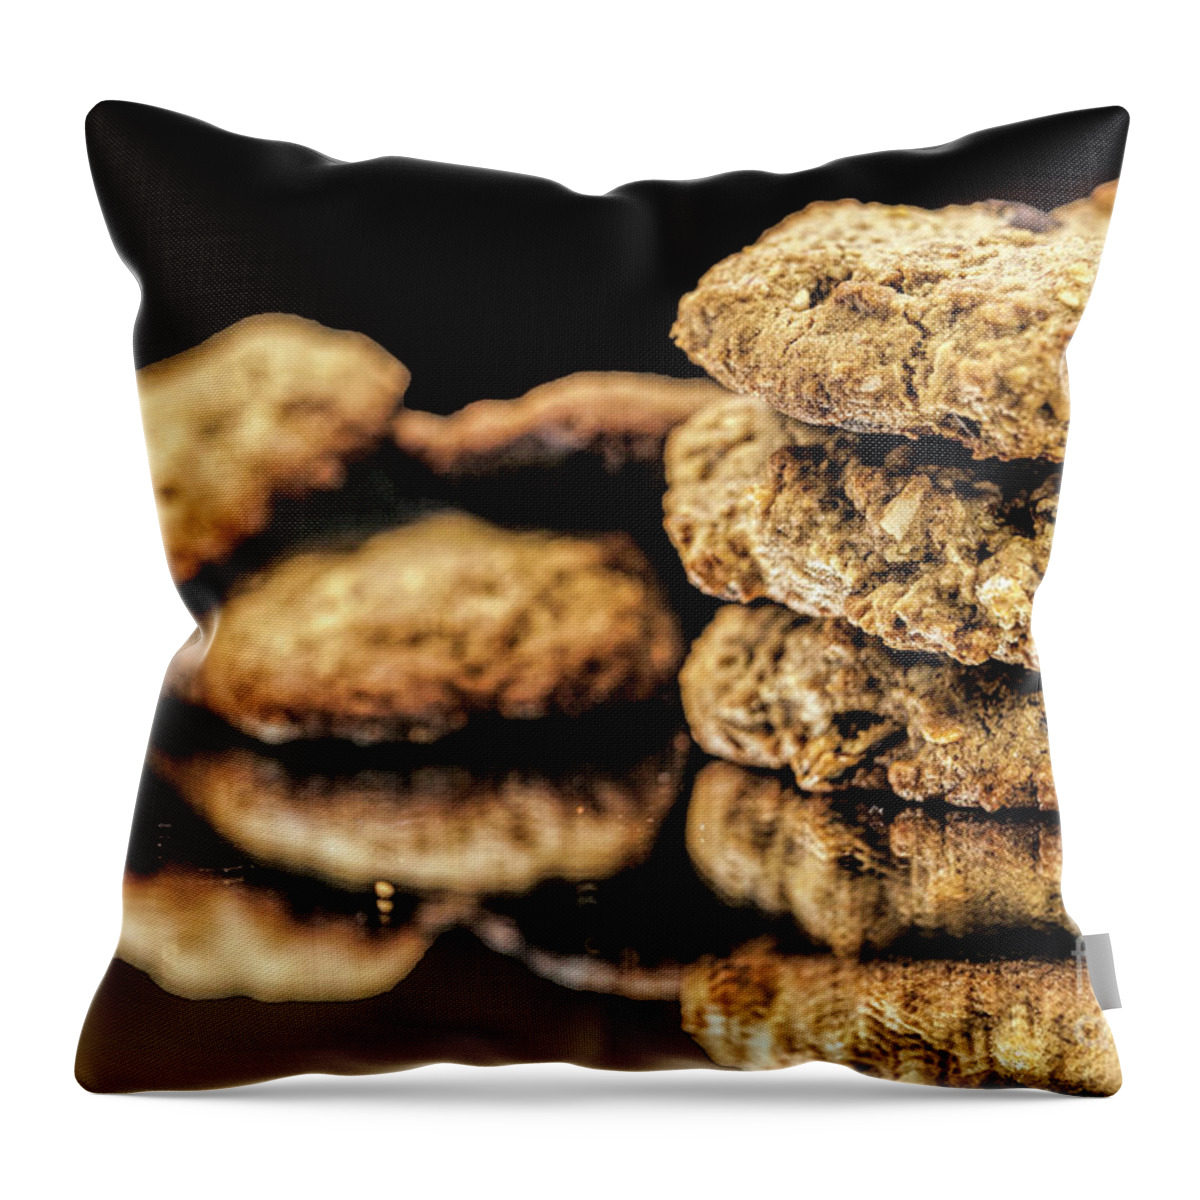 Cookies Throw Pillow featuring the photograph Granola Cookies by Shirley Mangini